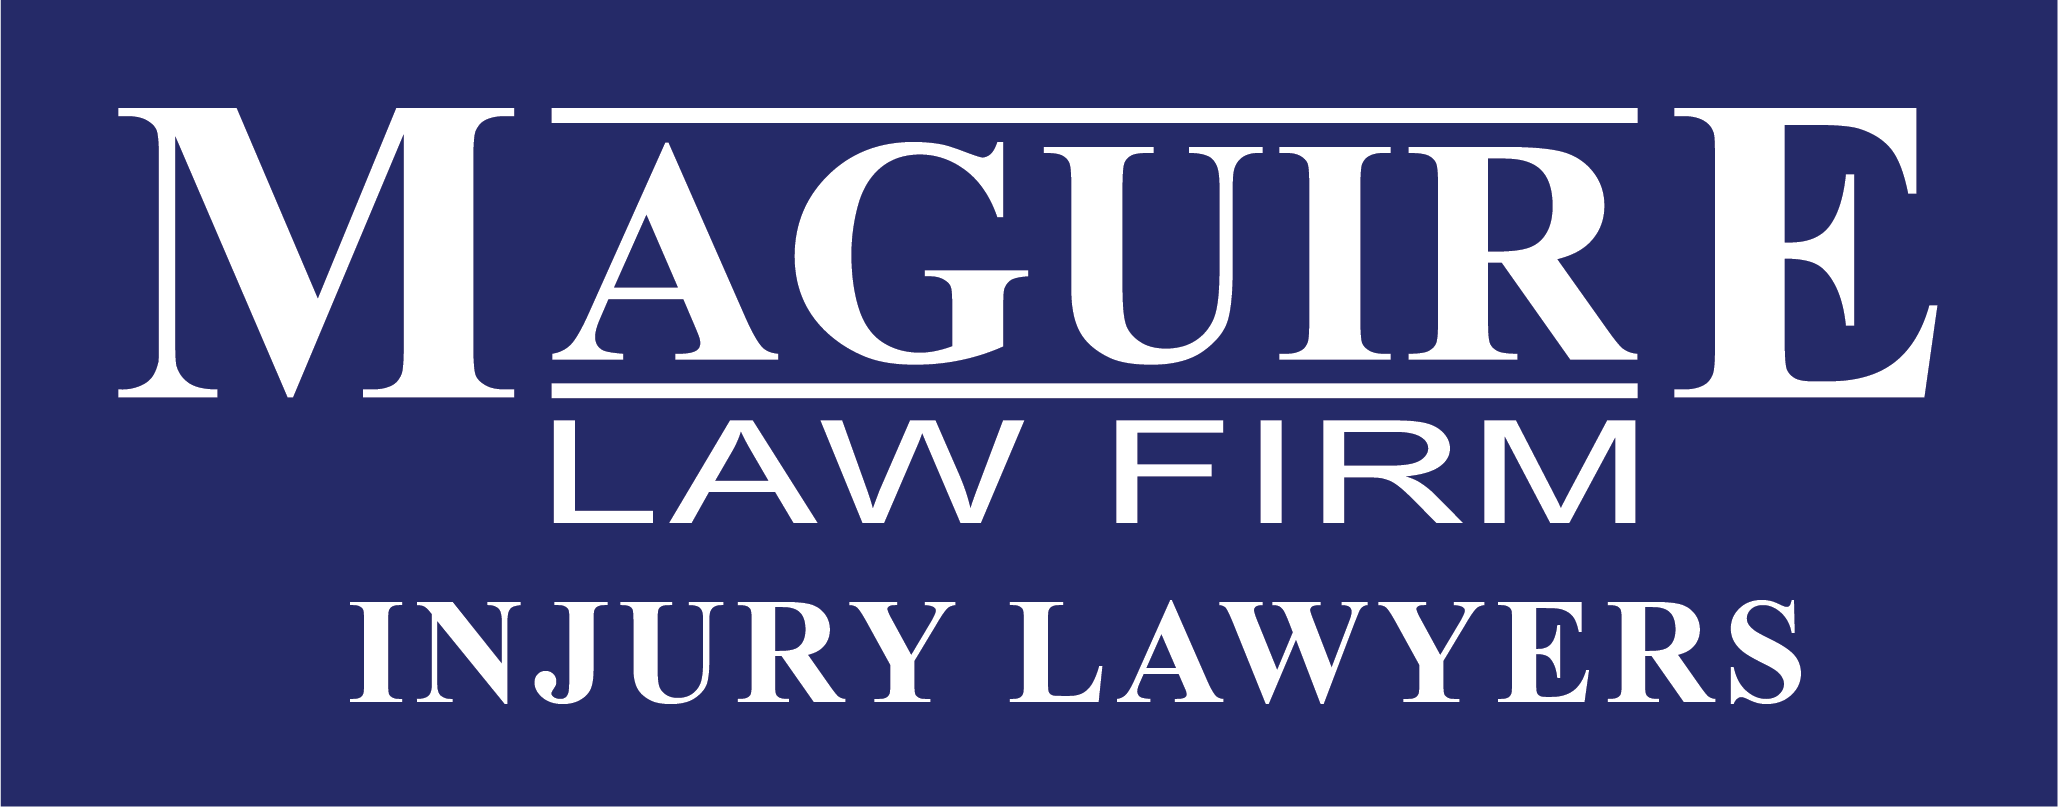 maguire law firm.png